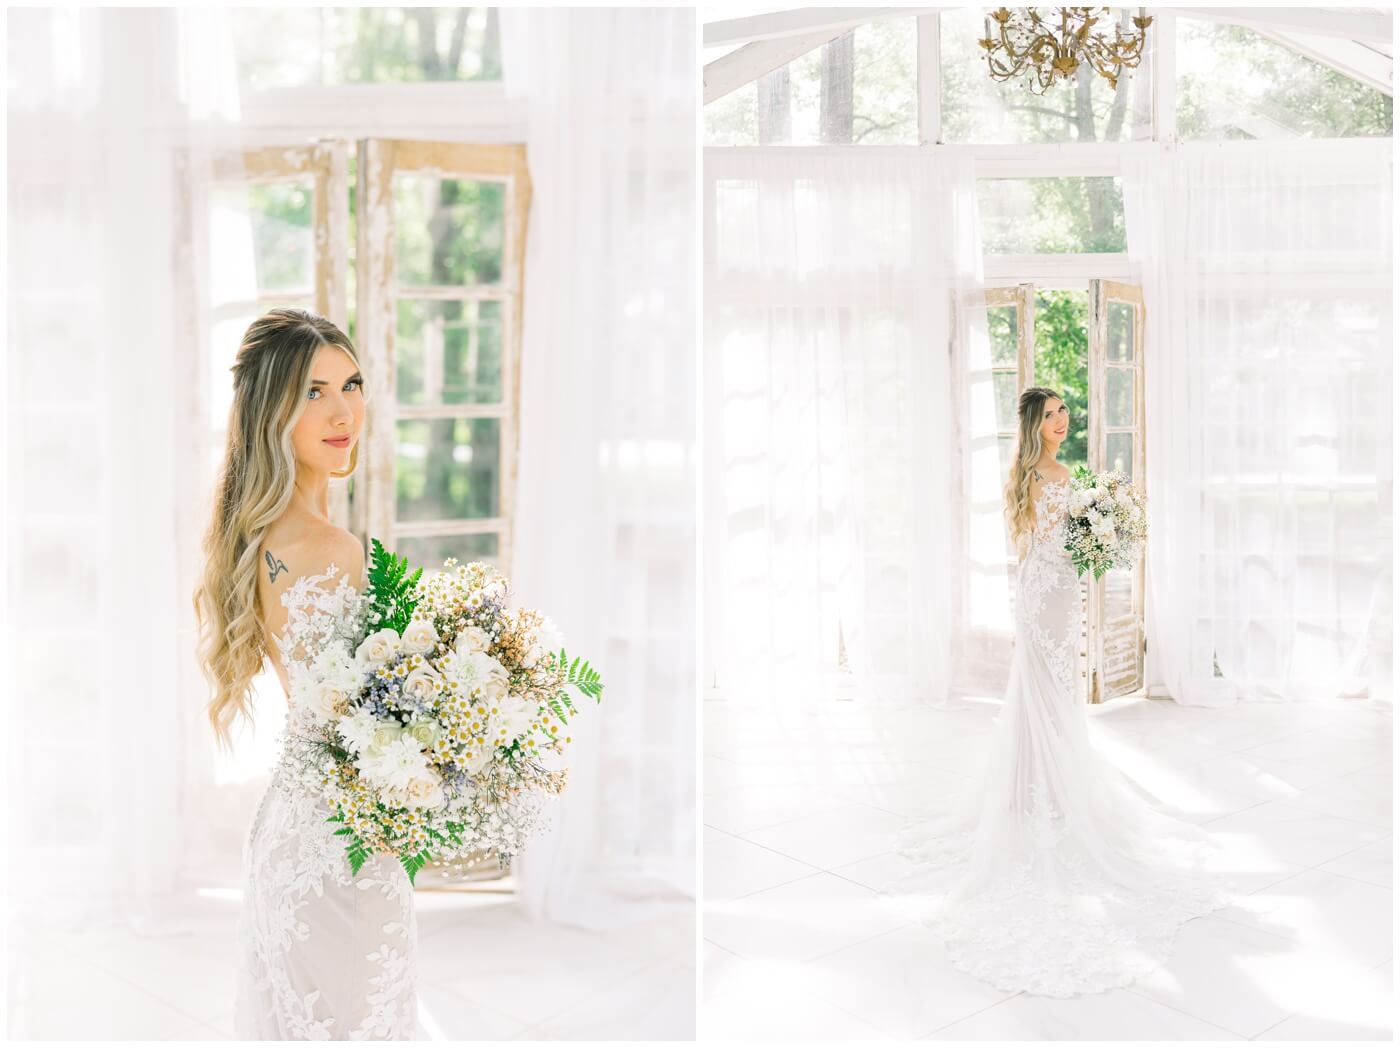 A bride smiles in her wedding dress holding a bouquet